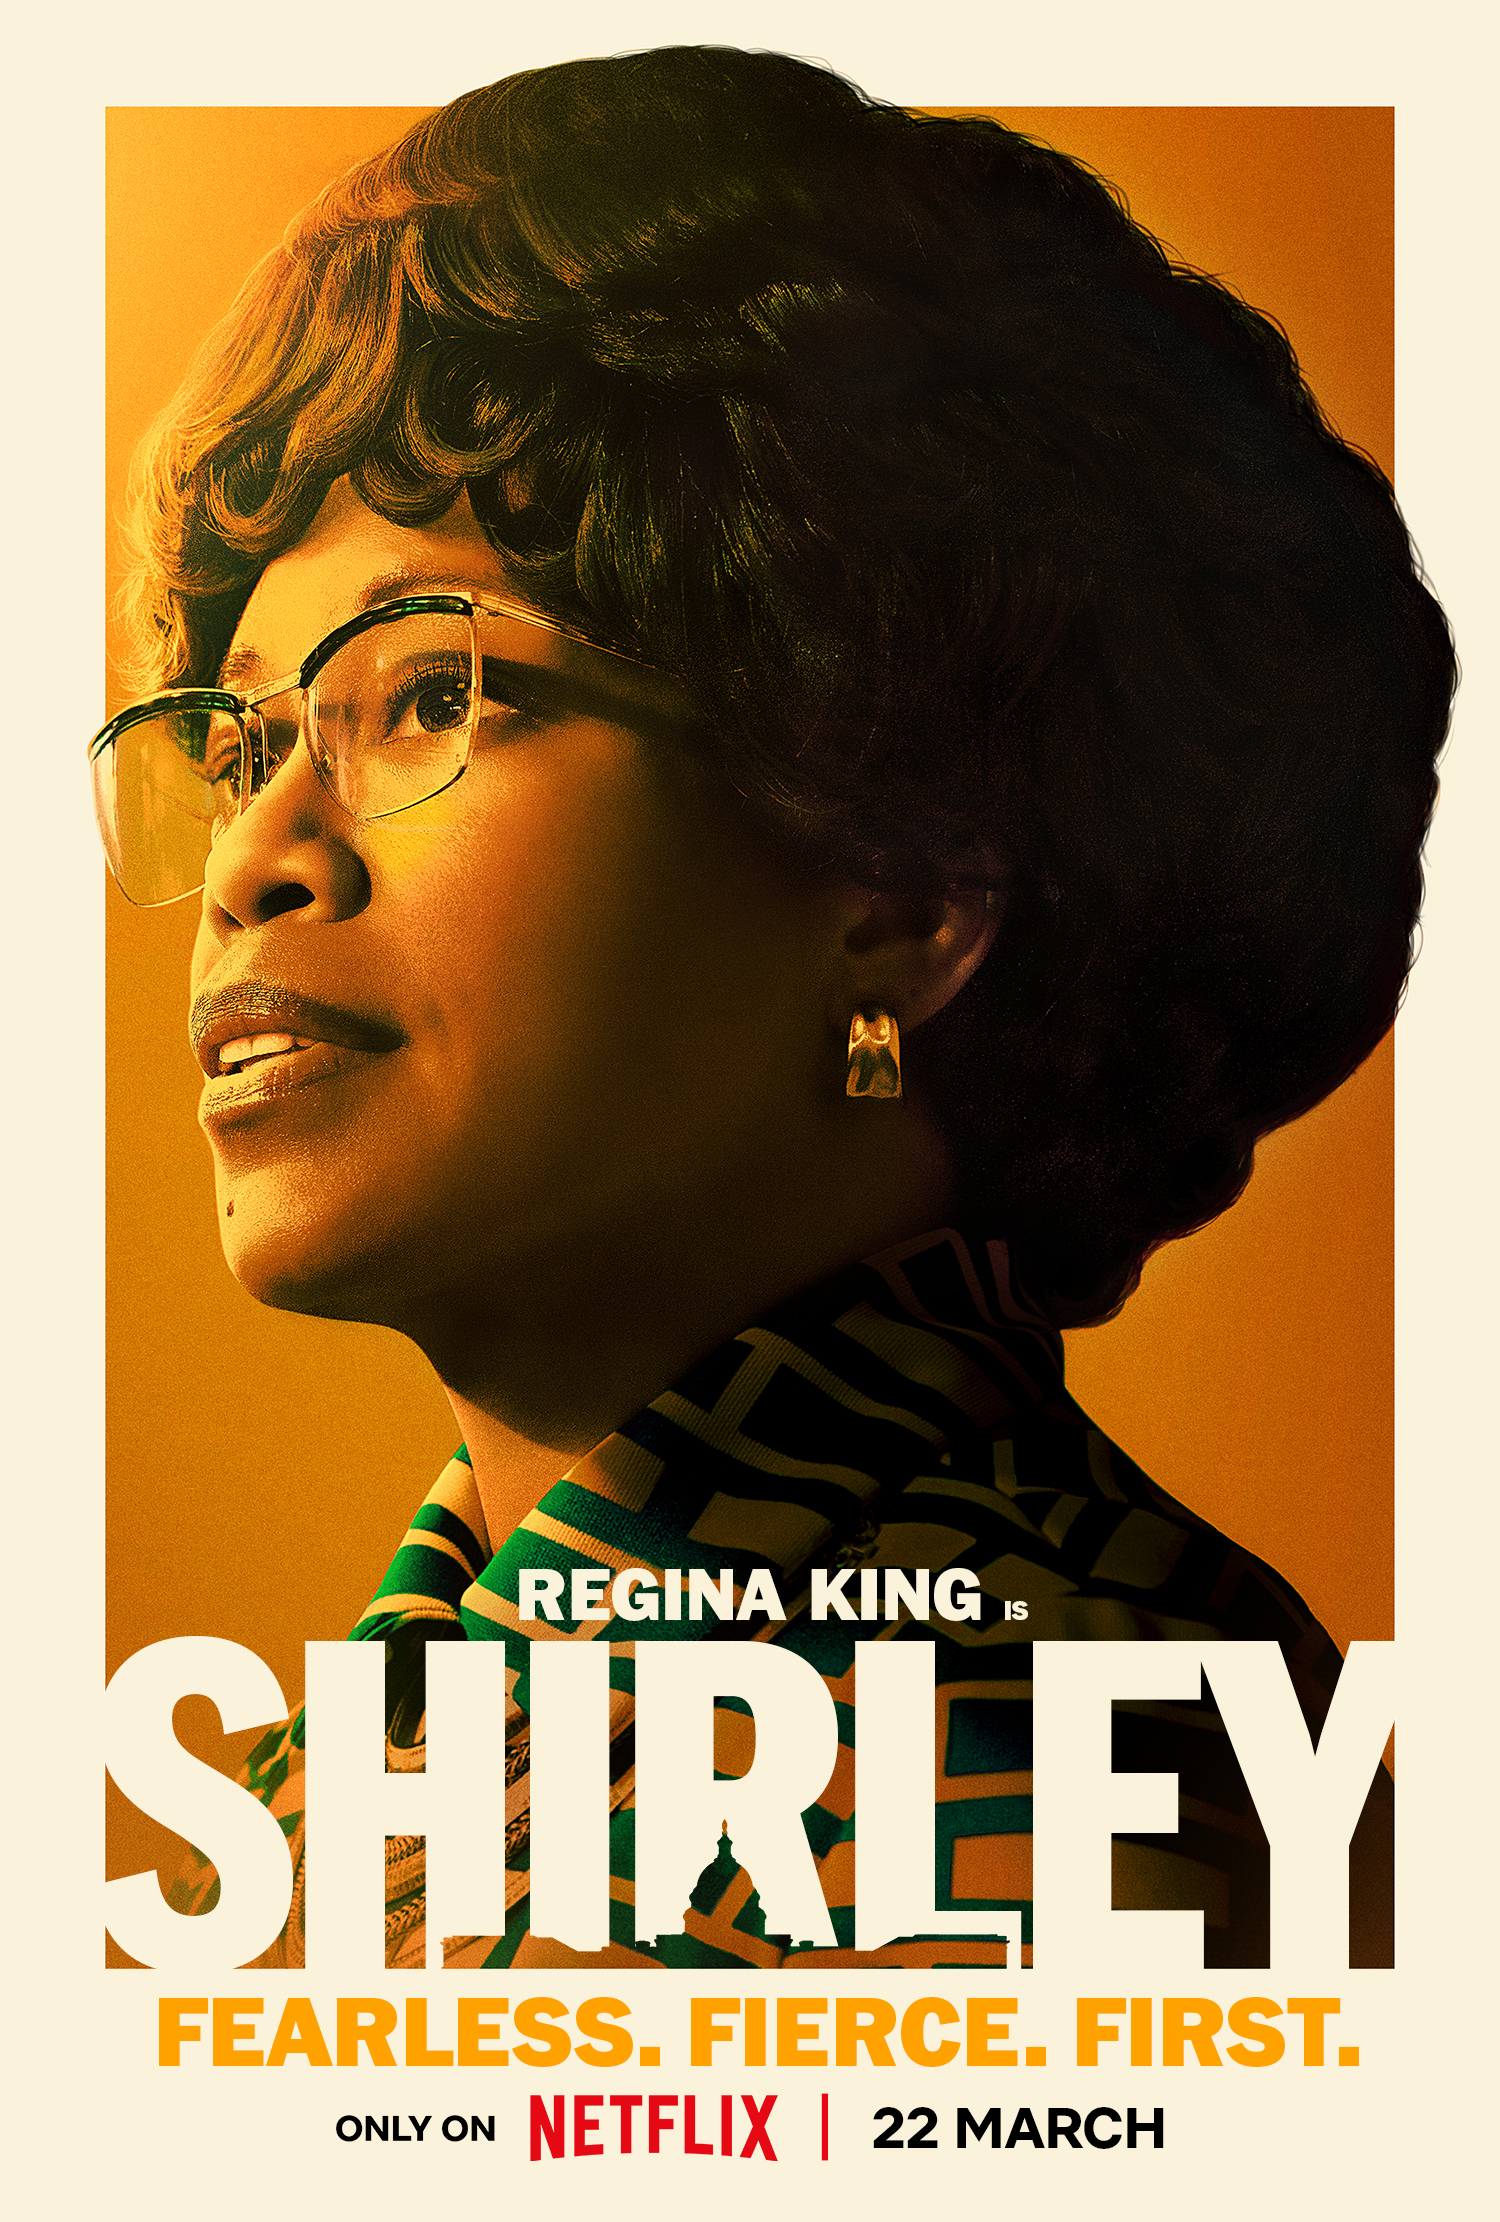 Regina King portrayed in a poster for &quot;Shirley,&quot; with the tagline &quot;Fearless. Fierce. First.&quot; Release date on Netflix is 22 March